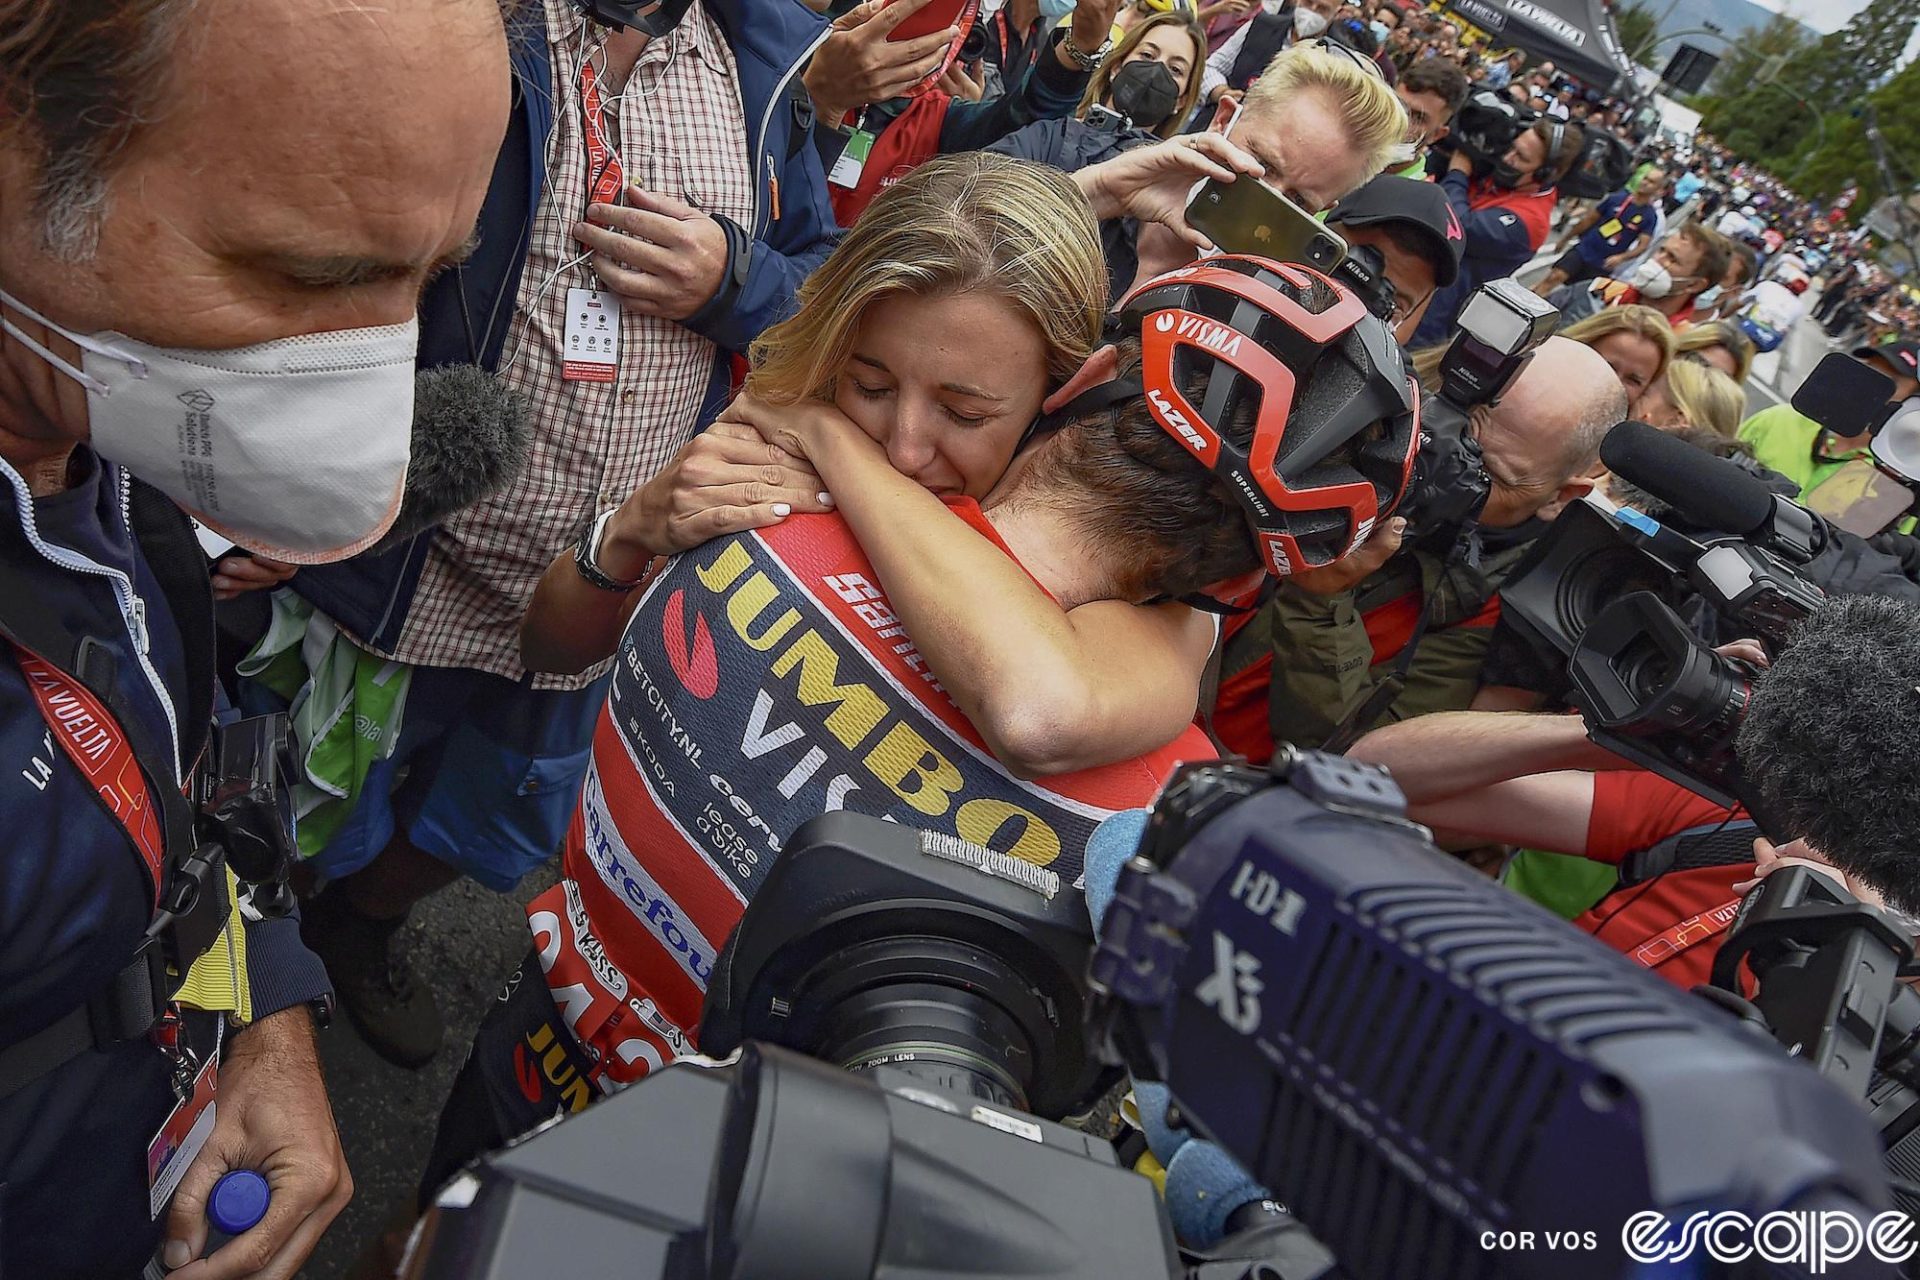 Sepp Kuss embraces his wife, Noemi, after a stage at the 2023 Vuelta a España. They're surrounded by a crowd of media.